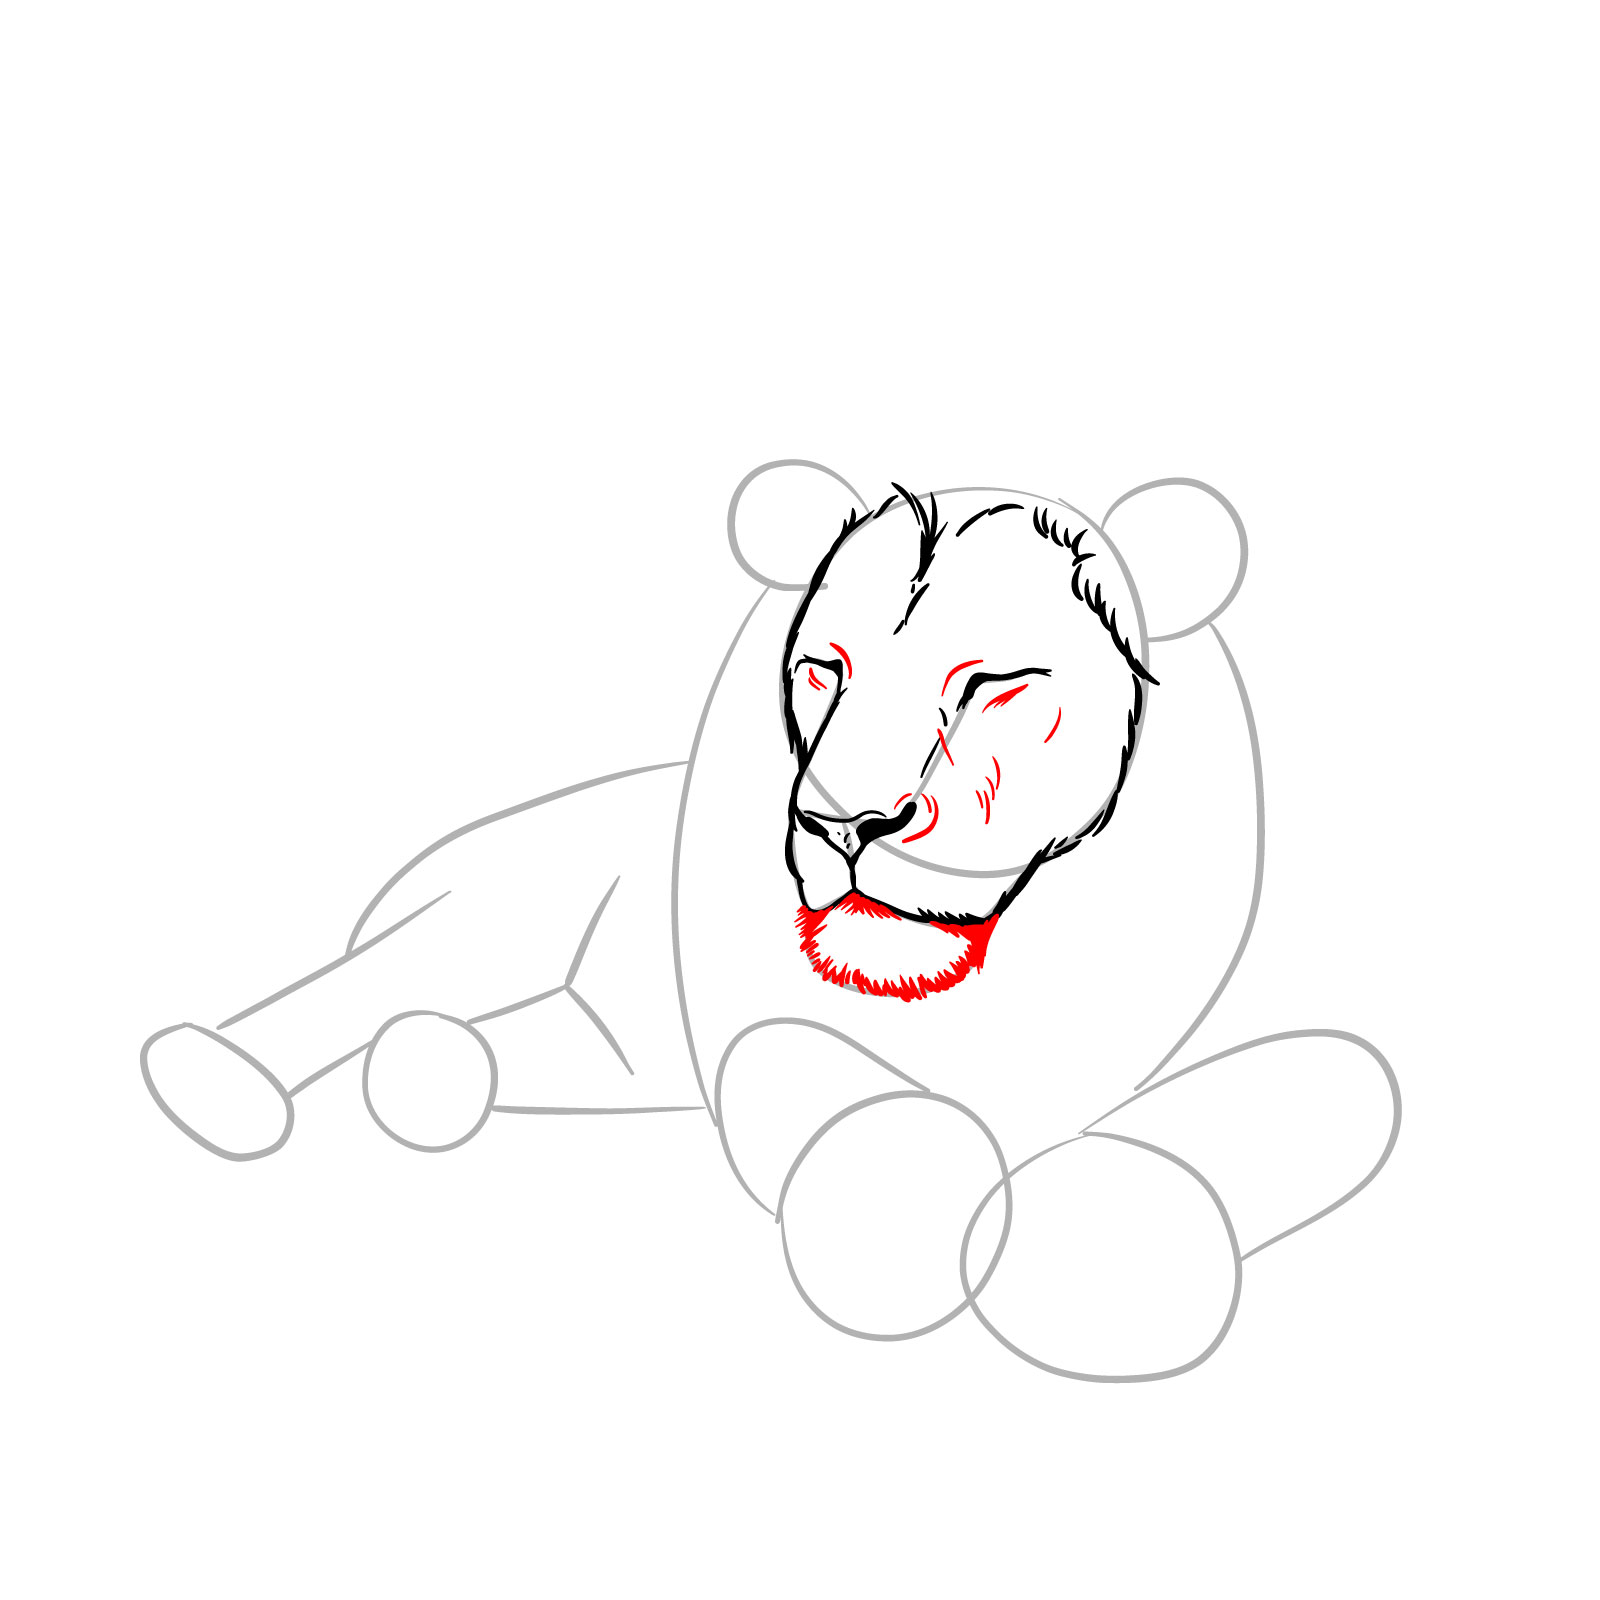 How to draw a sleeping lion in front view - Step 5: Chin and facial details